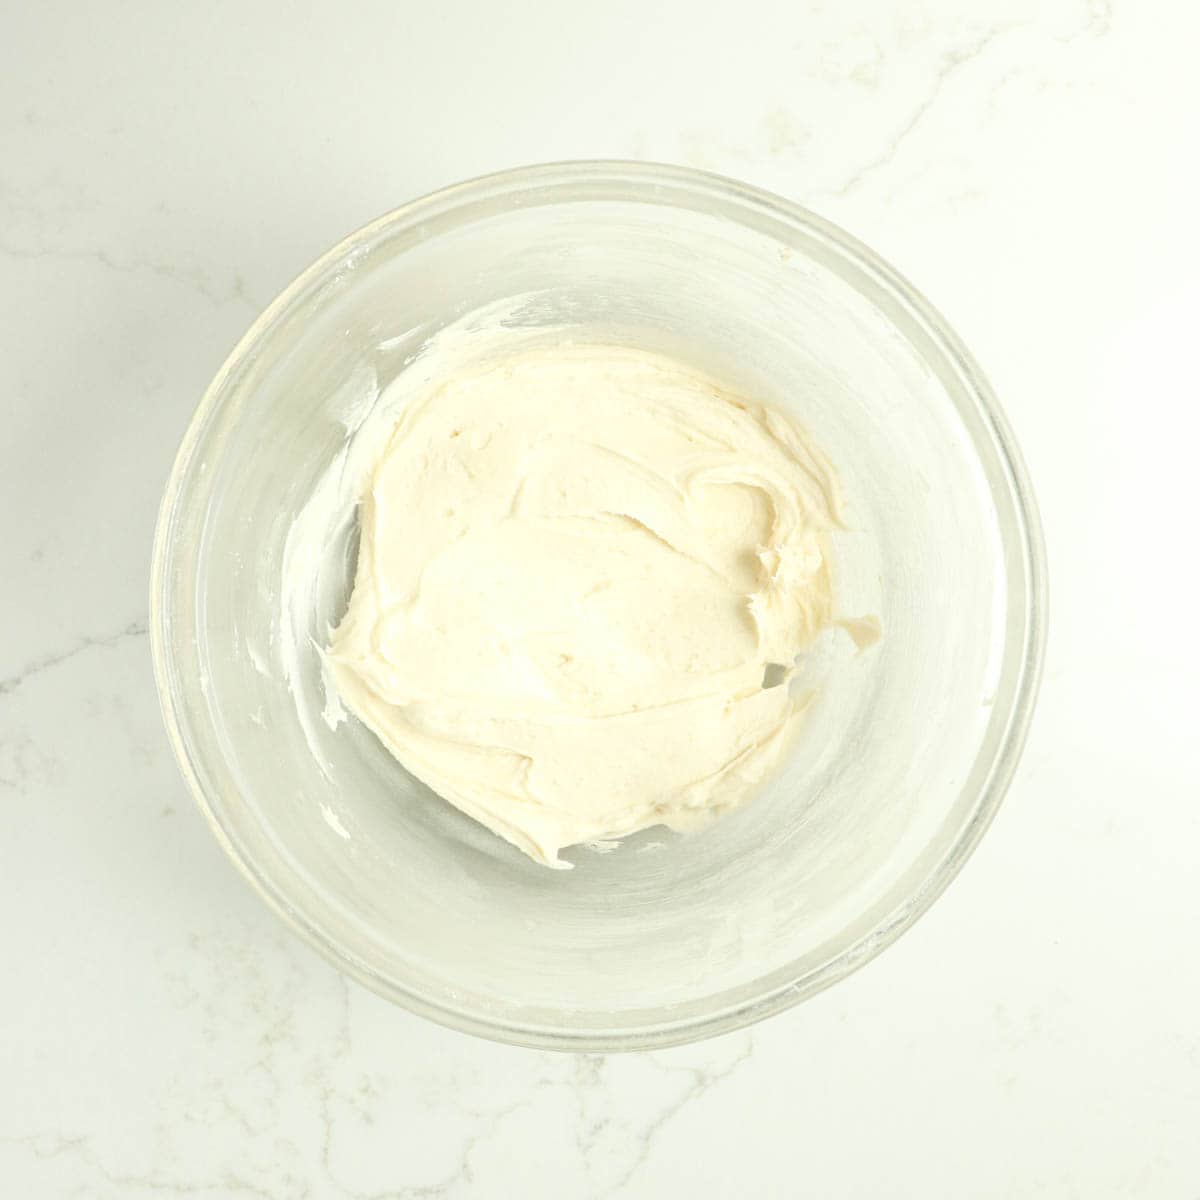 Cream cheese frosting filling in a glass bowl.